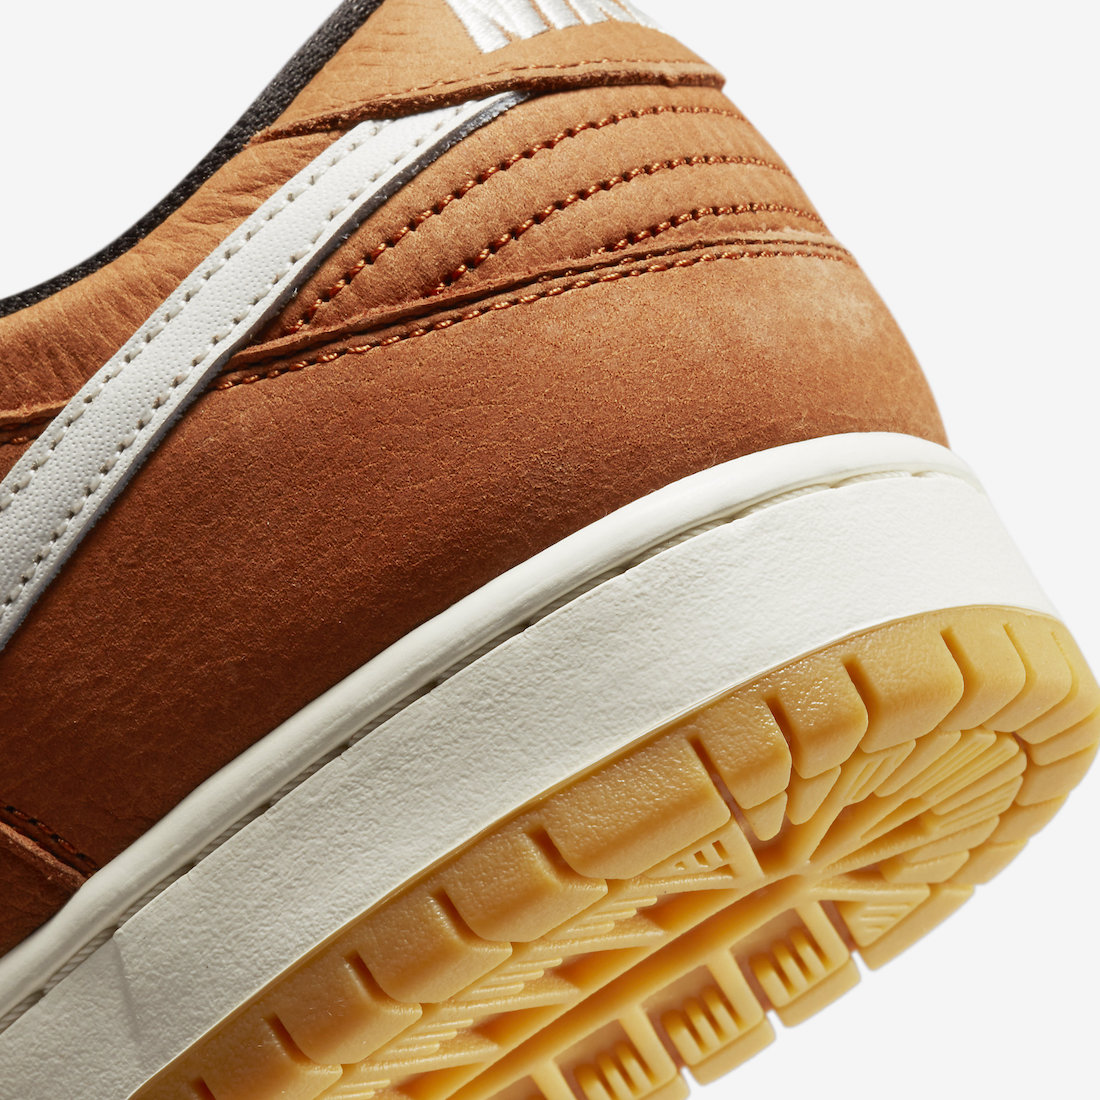 Nike SB Dunk Low Dark Russet Sail DH1319-200 Release Date